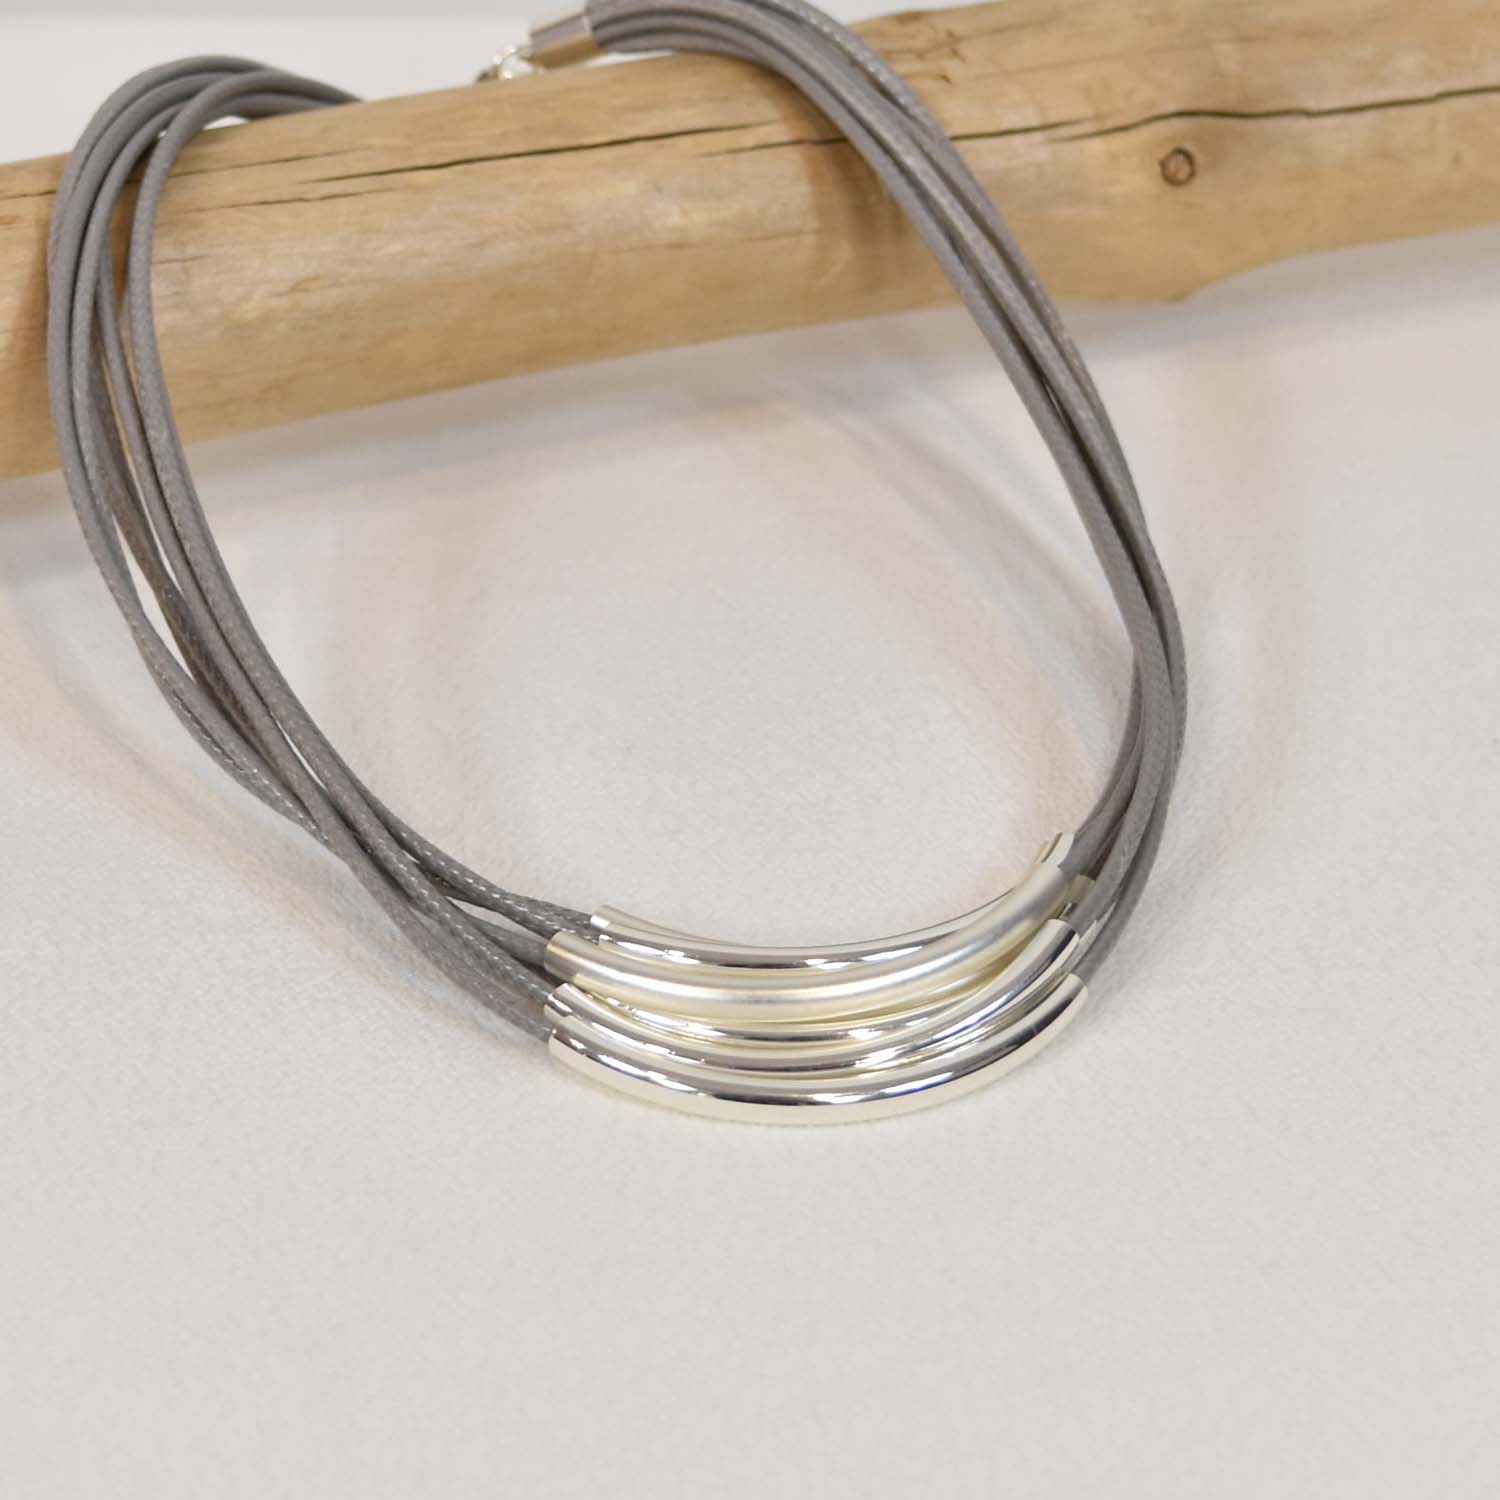 Gray waxed strings necklace